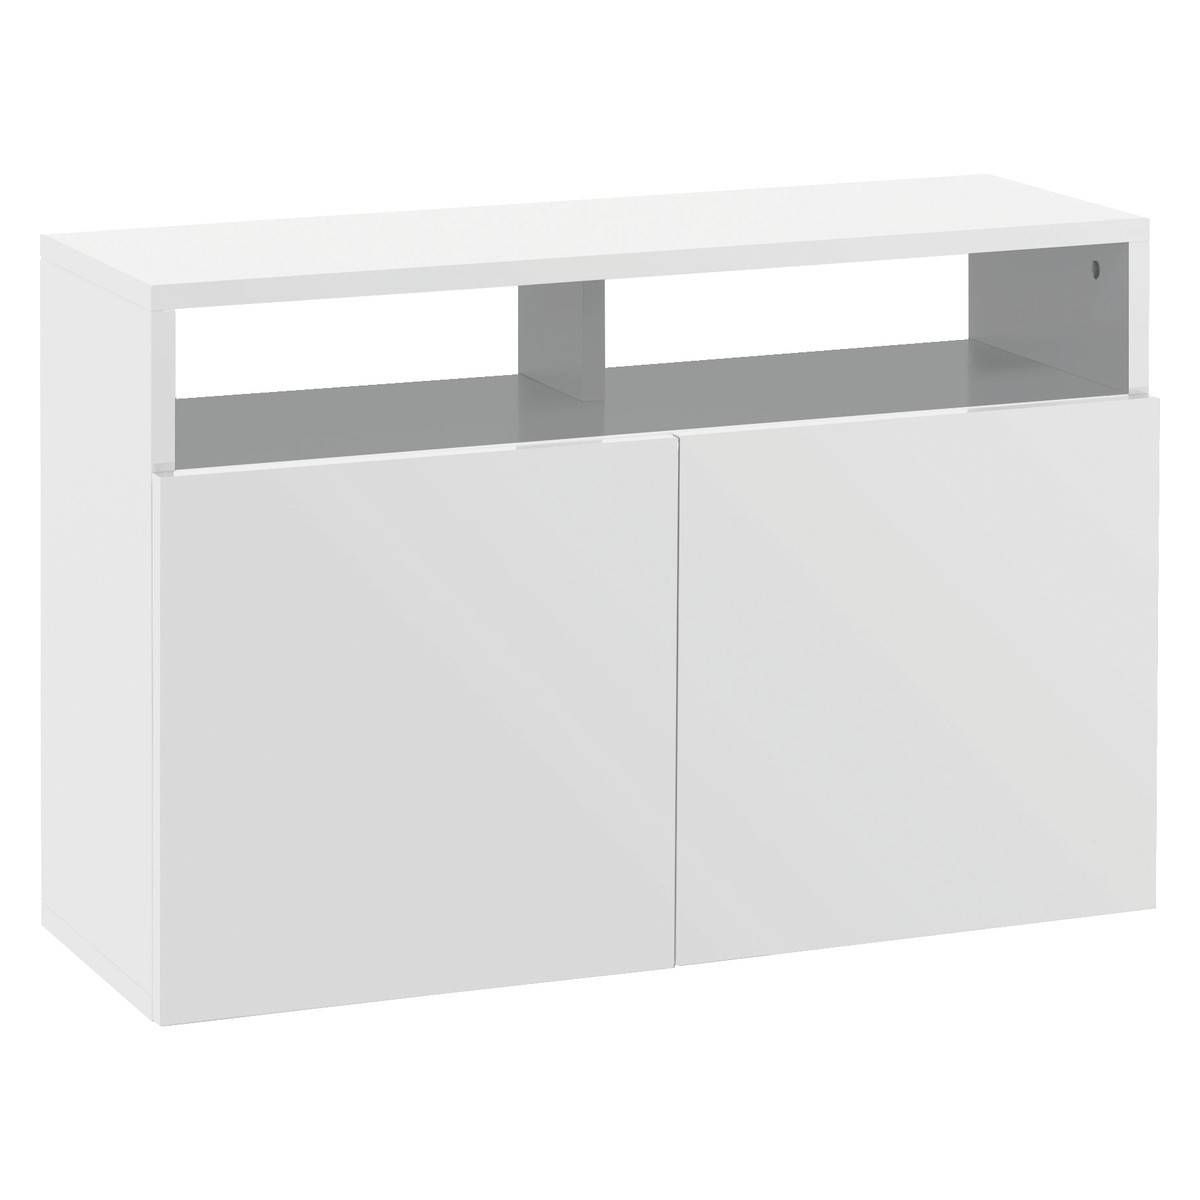 Kubrik White High Gloss Small Sideboard | Buy Now At Habitat Uk In Small Sideboards (View 12 of 30)